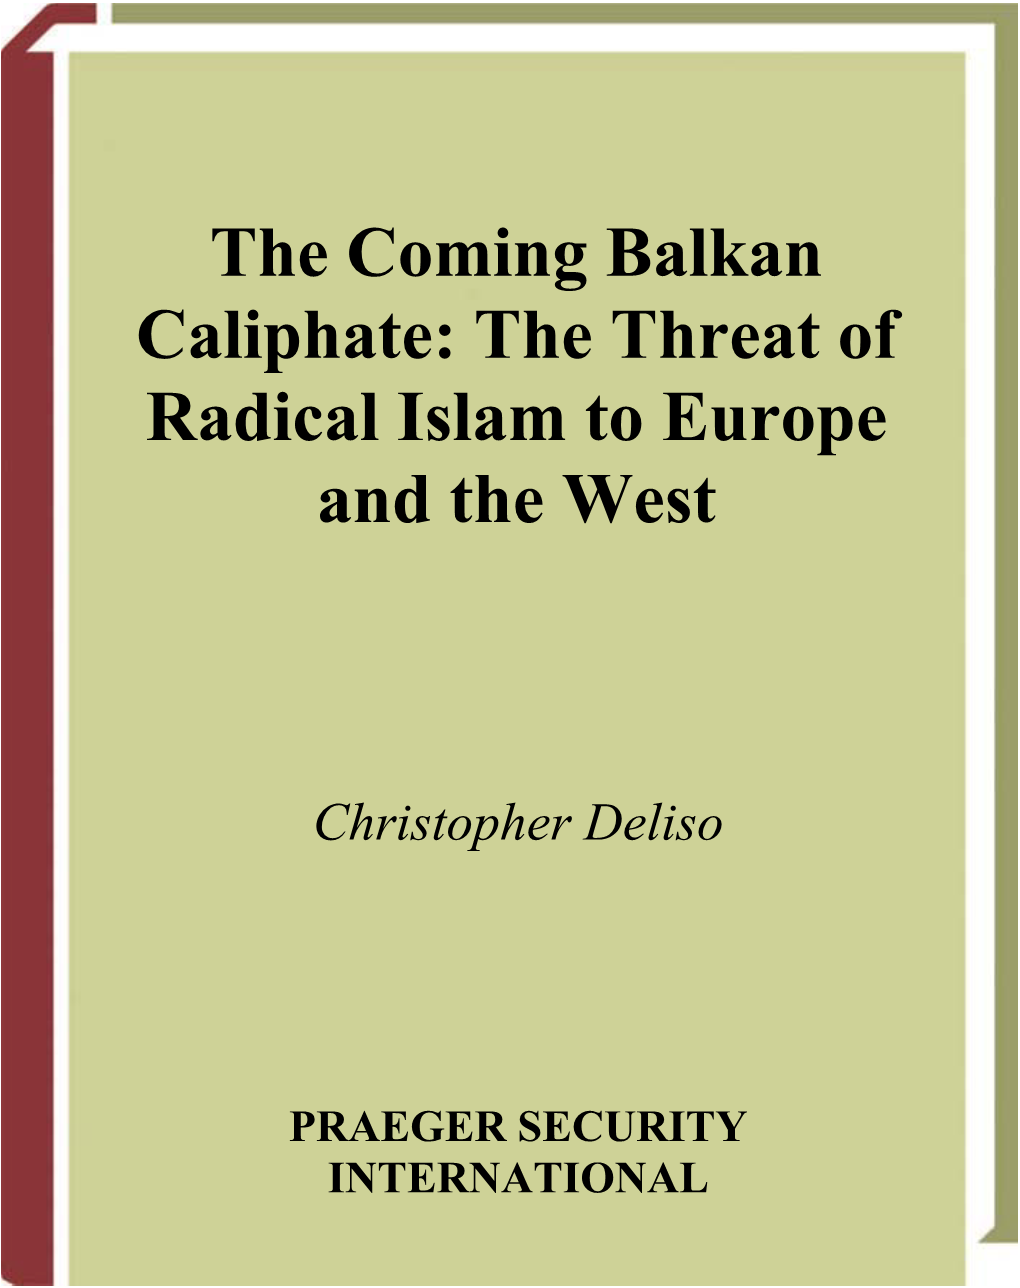 The Coming Balkan Caliphate: the Threat of Radical Islam to Europe and the West